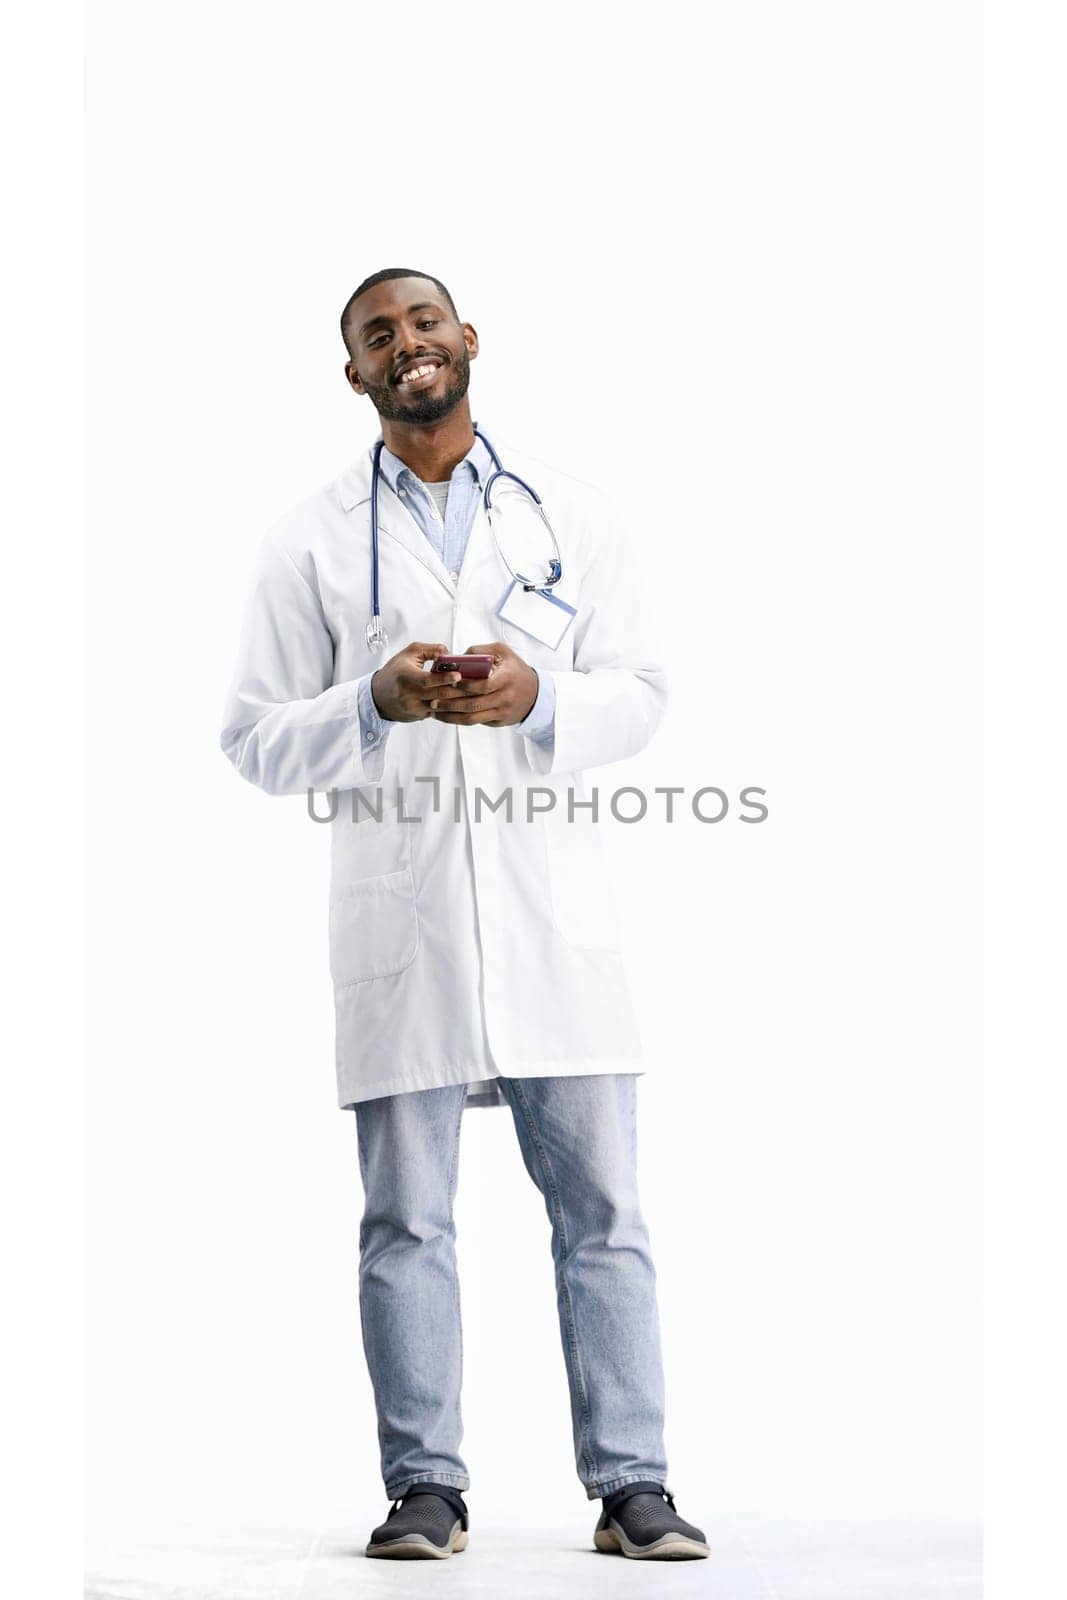 The doctor, in full height, on a white background, talking on the phone.